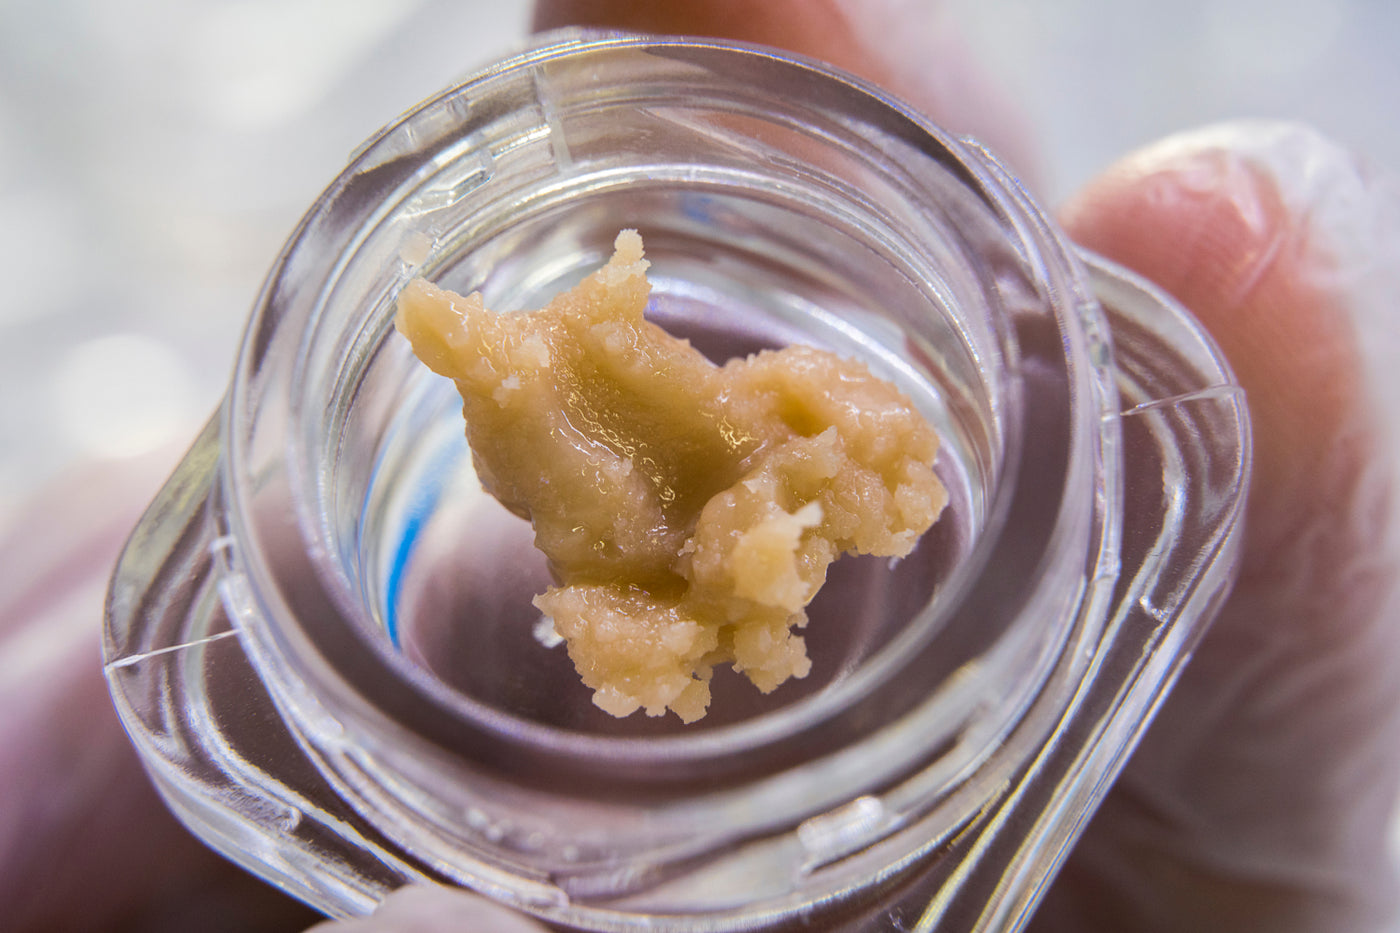 What's the difference between live resin and distillate?